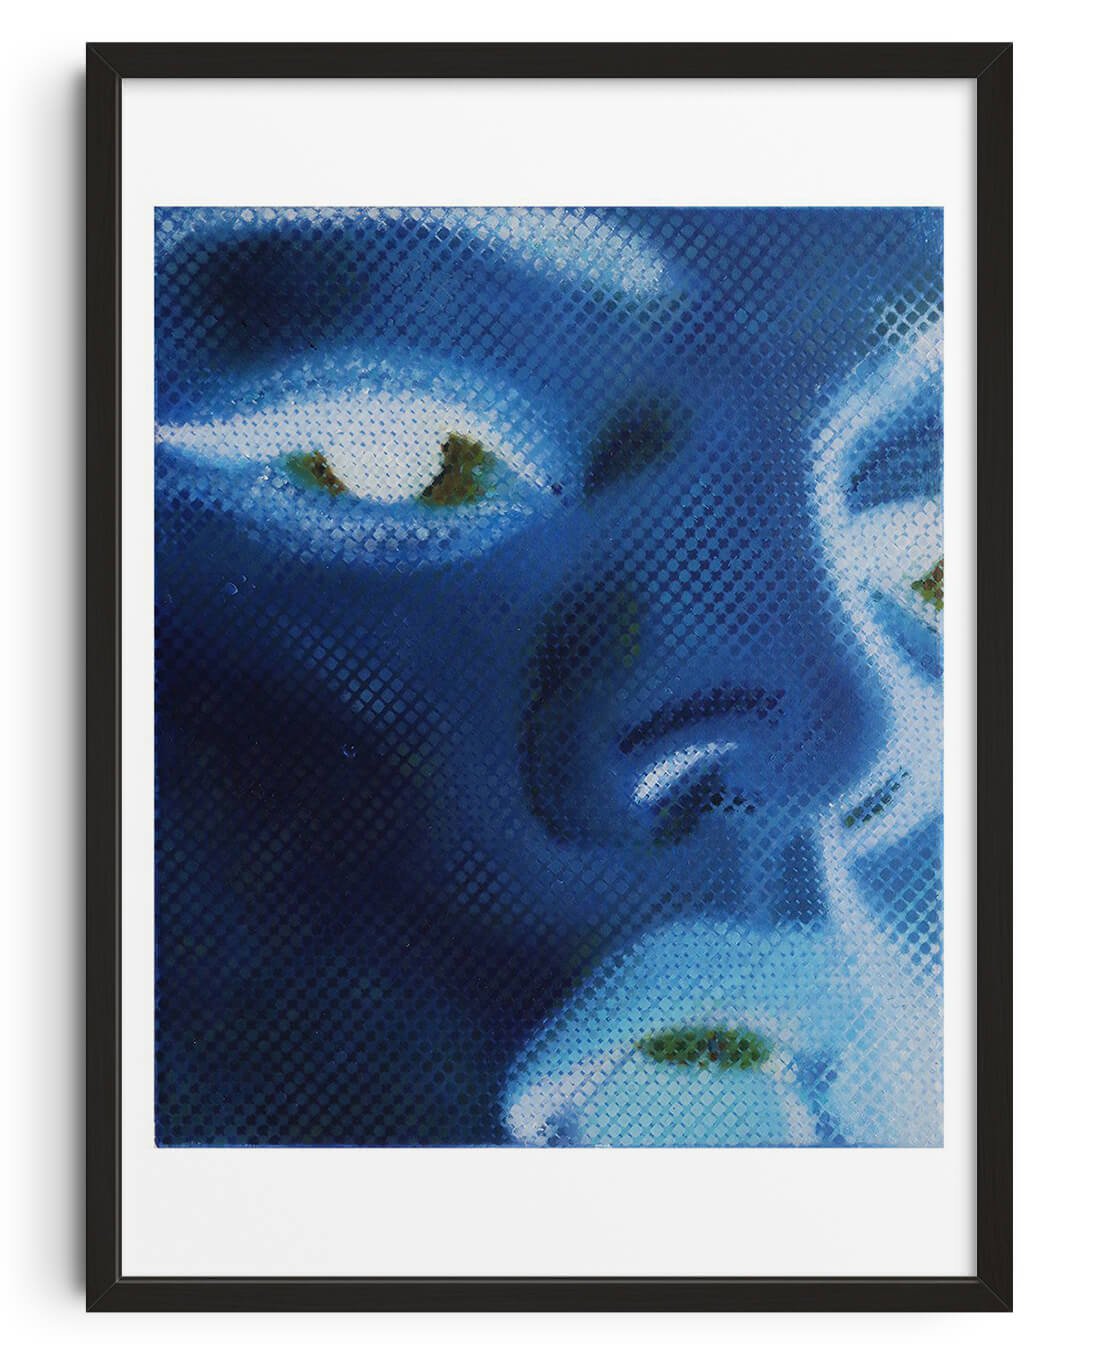 Portrait Study in negative contemporary wall art print by Sam Creasey - sold by DROOL